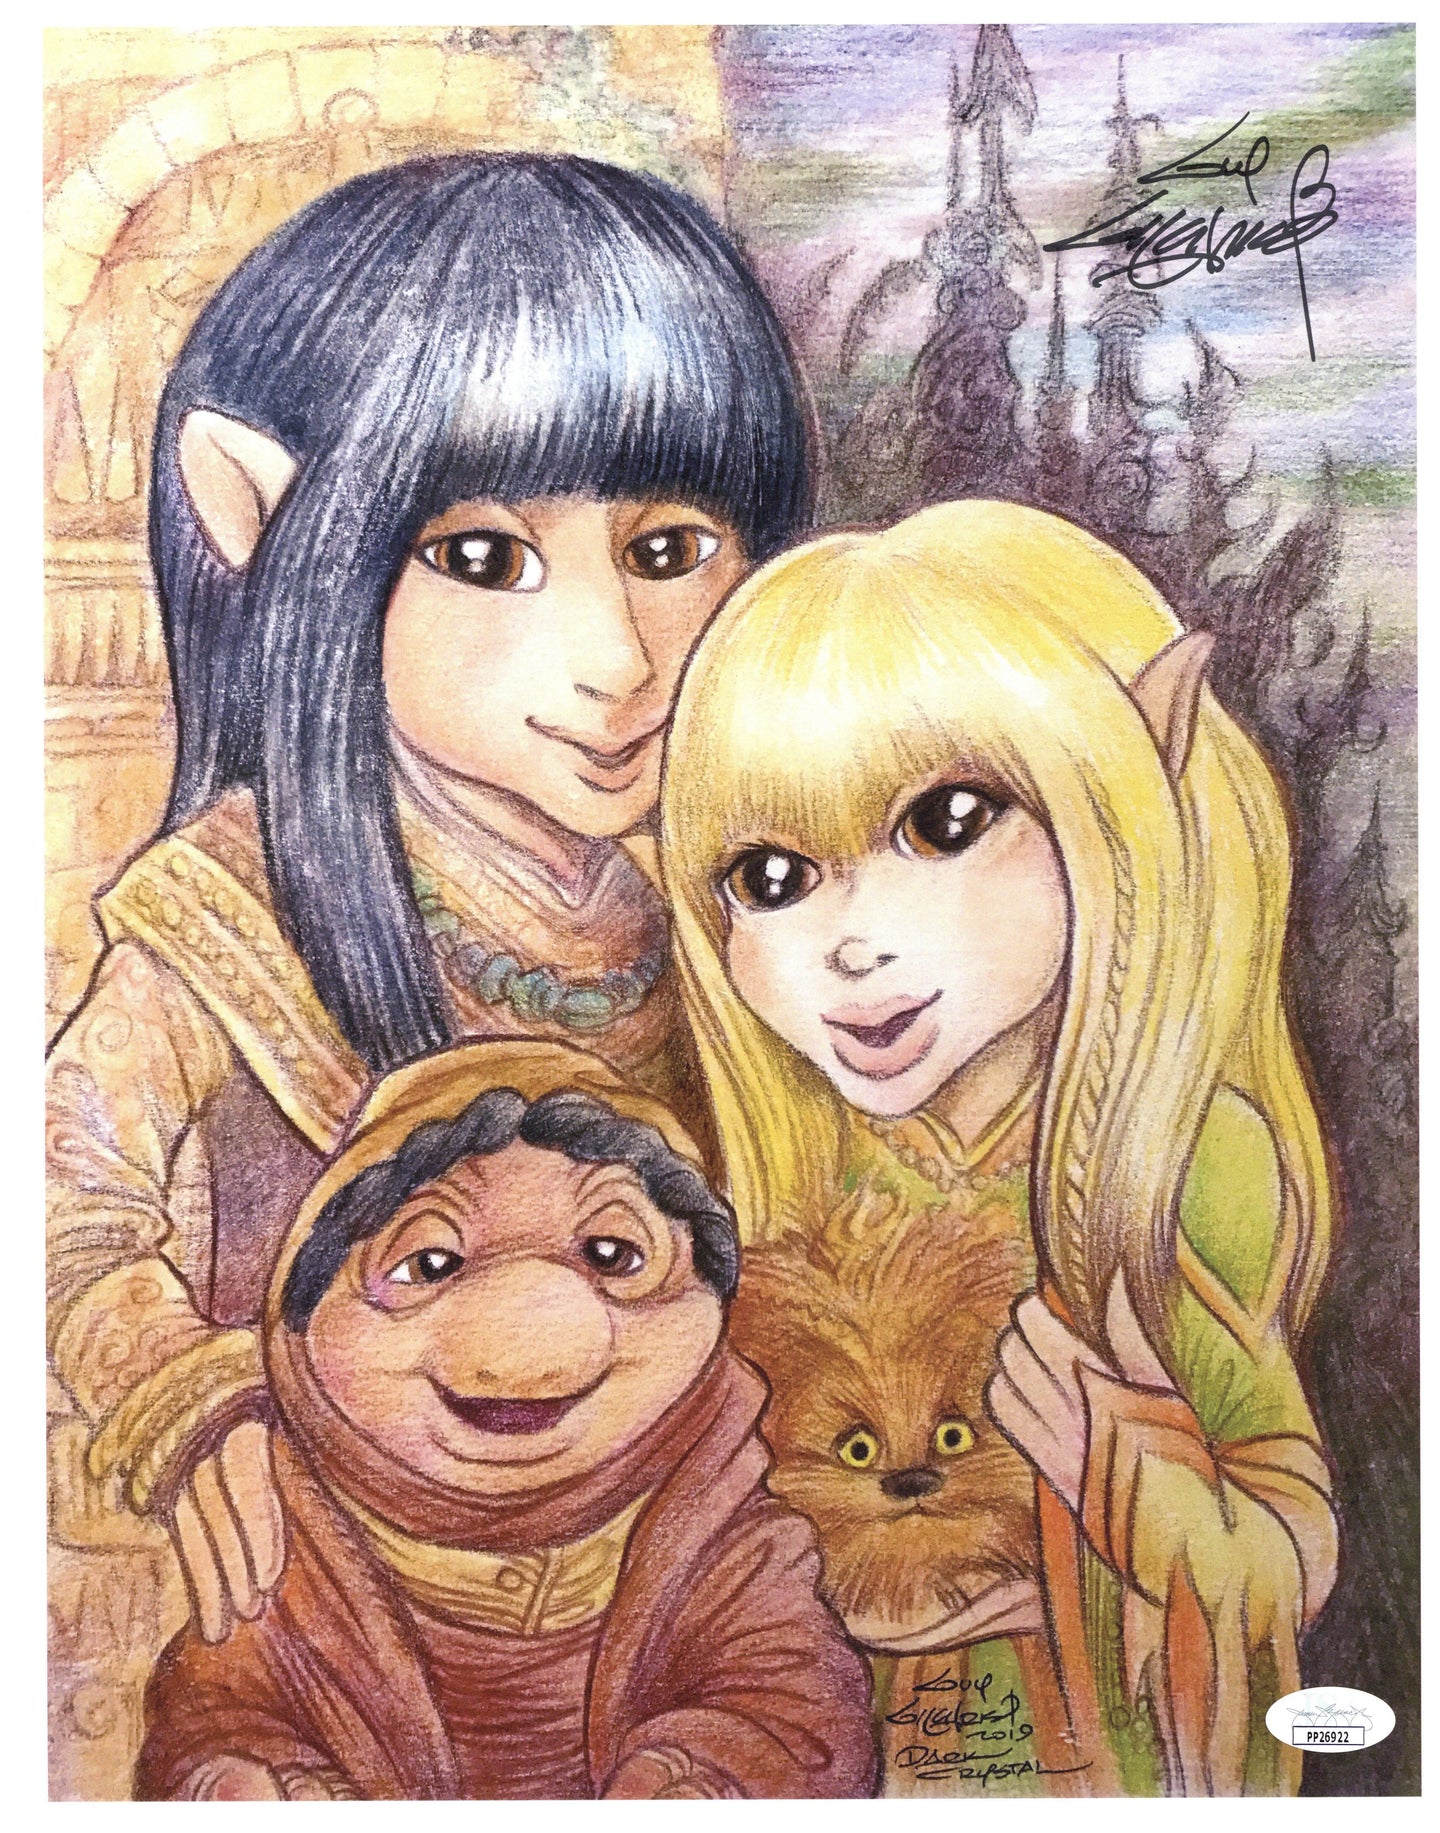 Dark Crystal #1 11x14 Art Print - Created by & Signed by Guy Gilchrist - Includes JSA COA